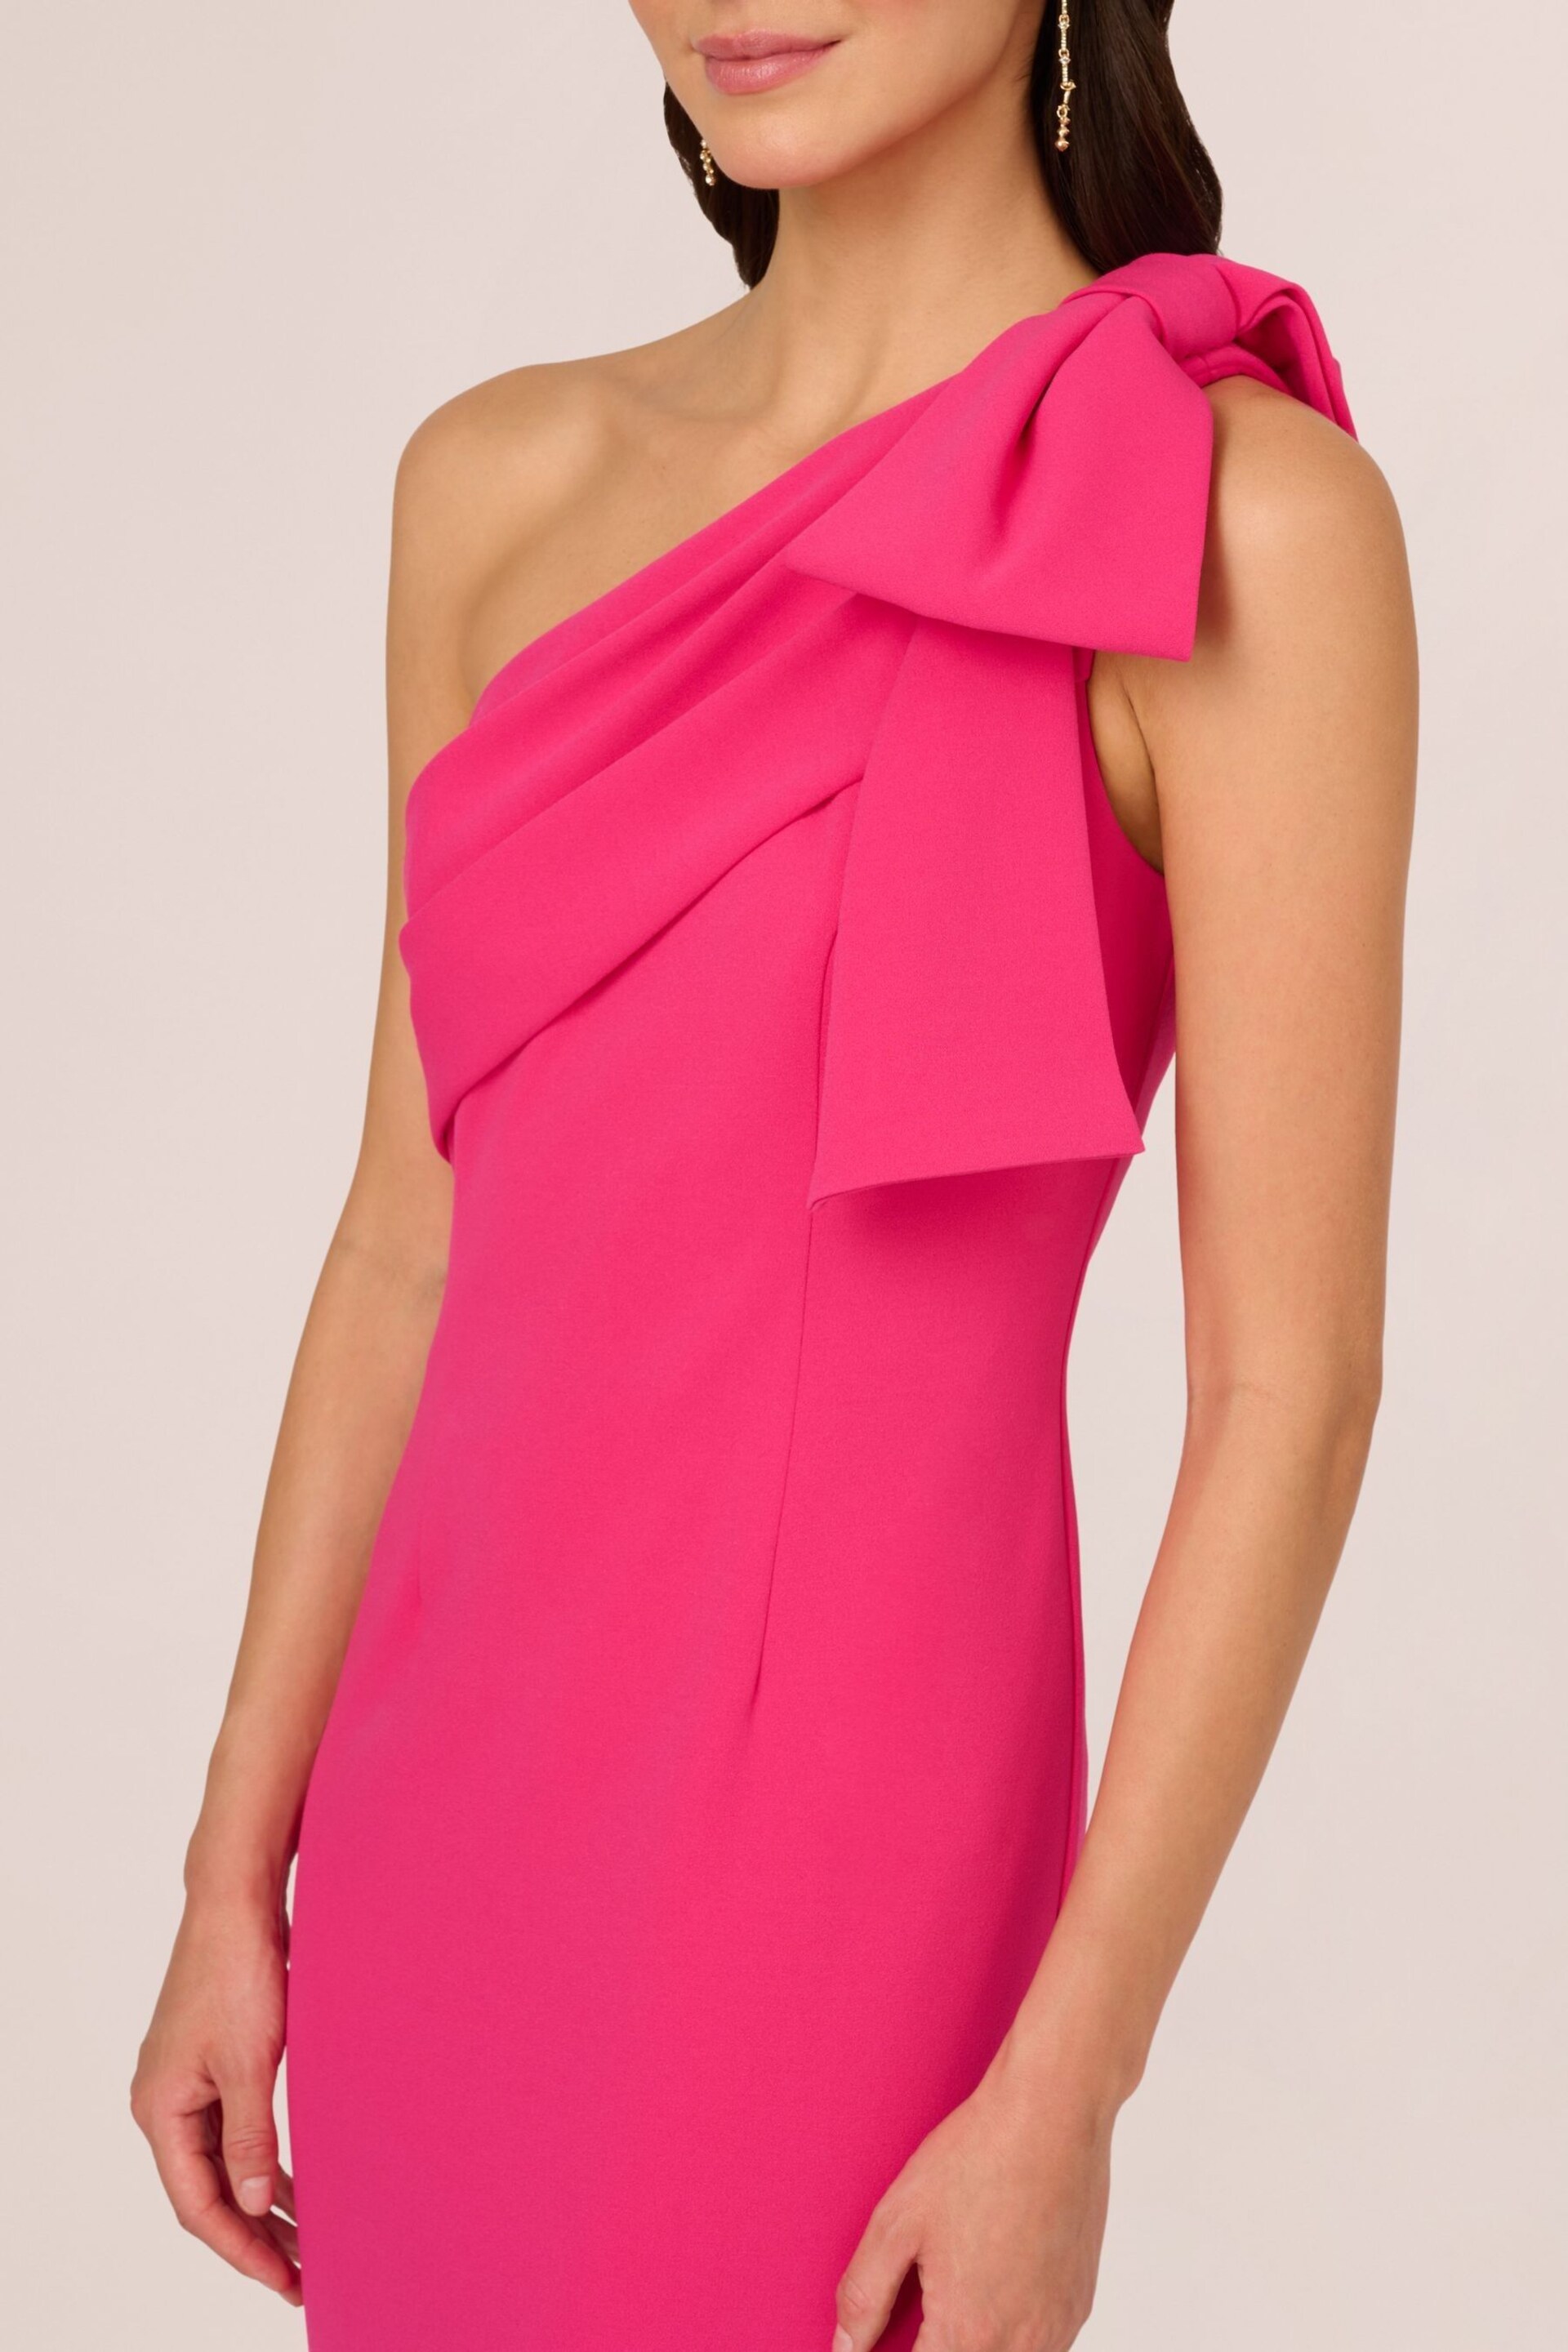 Adrianna Papell Pink Stretch Crepe Long Dress - Image 4 of 7